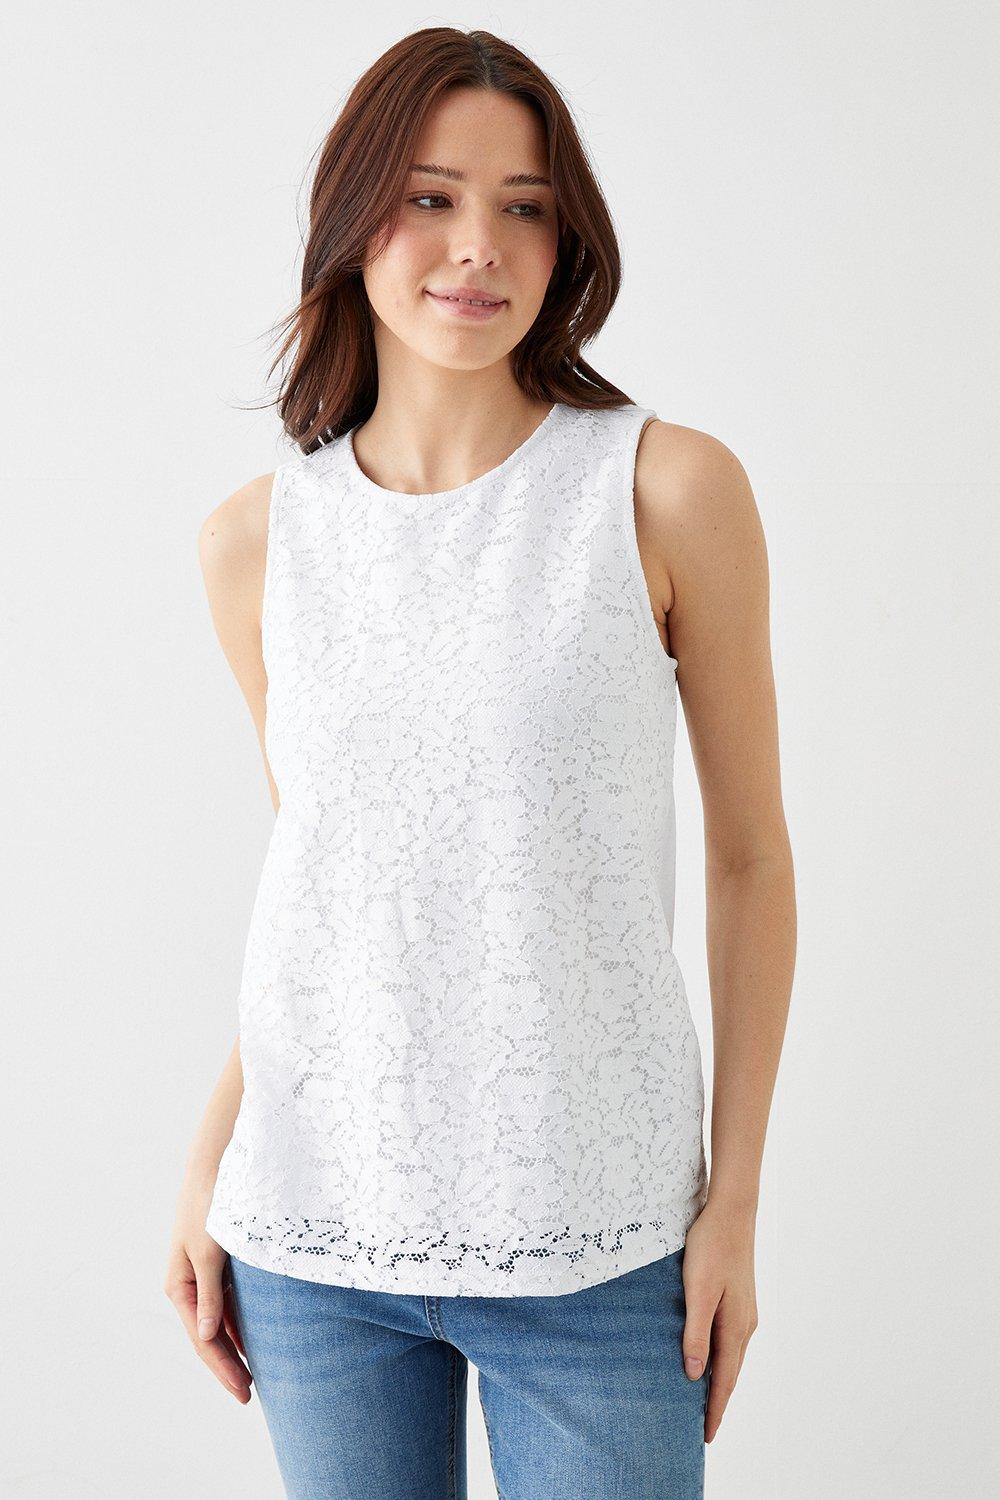 Women’s Lace Front Sleeveless Top - white - L